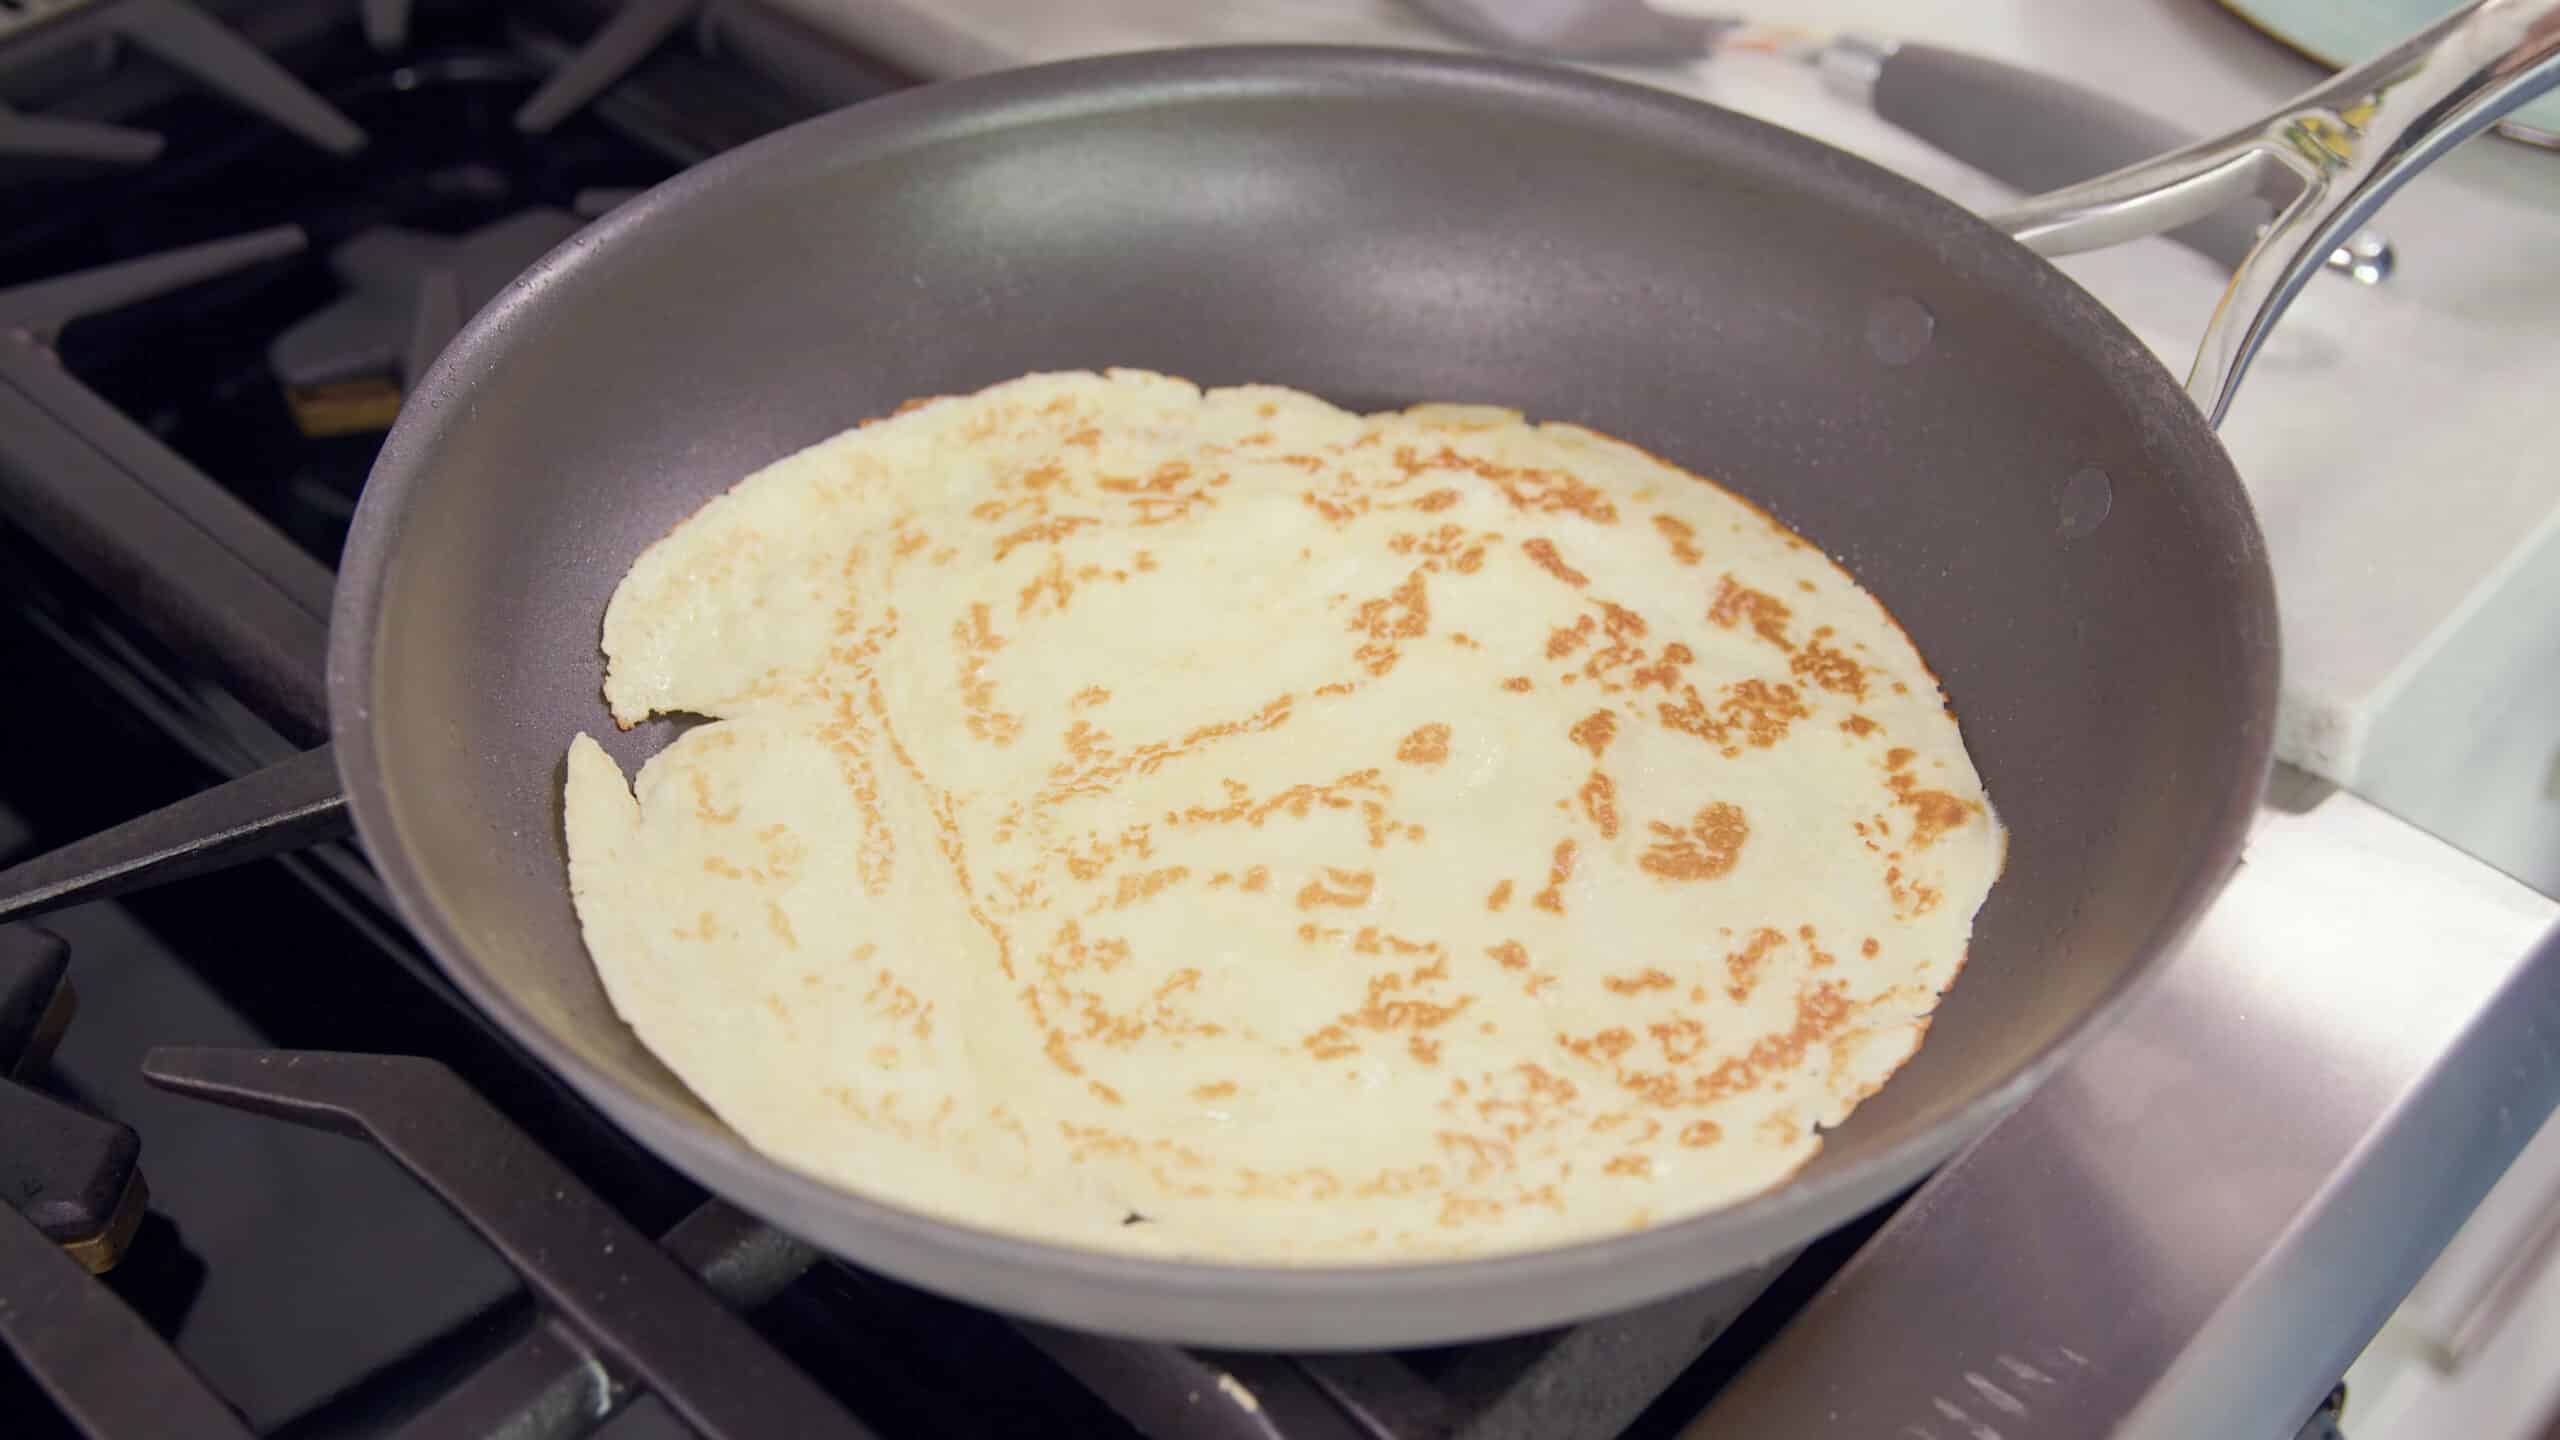 Angled view of metal non-stick pan with a flipped crepe showing the cooked side with golden brown areas cooked to perfection all over a stovetop burner.